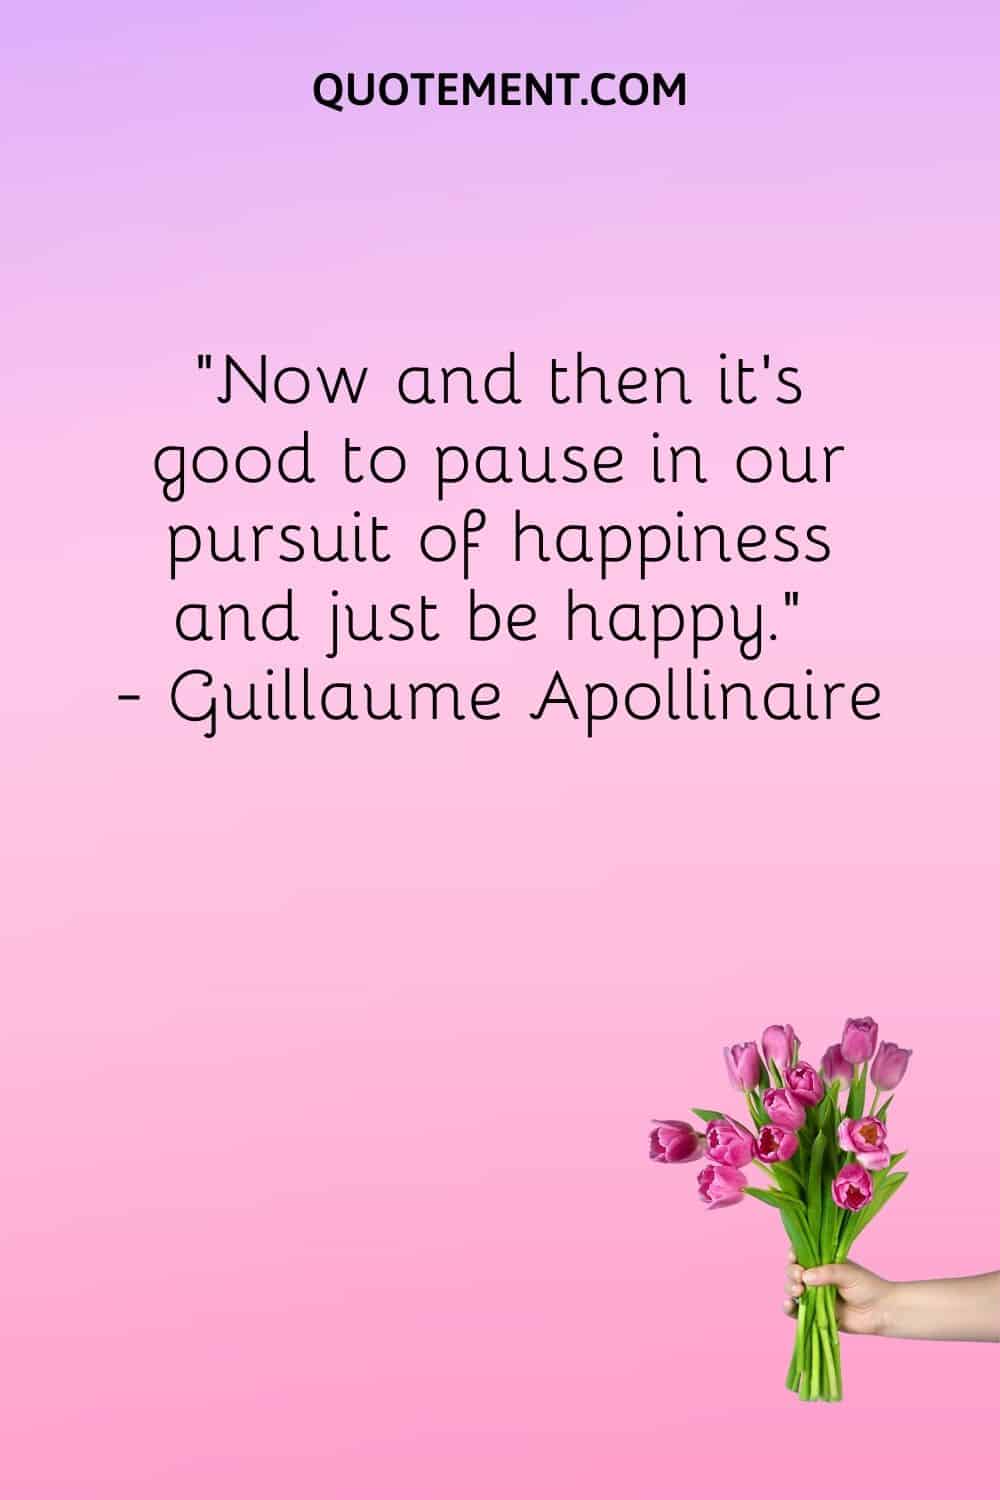 Now and then it's good to pause in our pursuit of happiness and just be happy